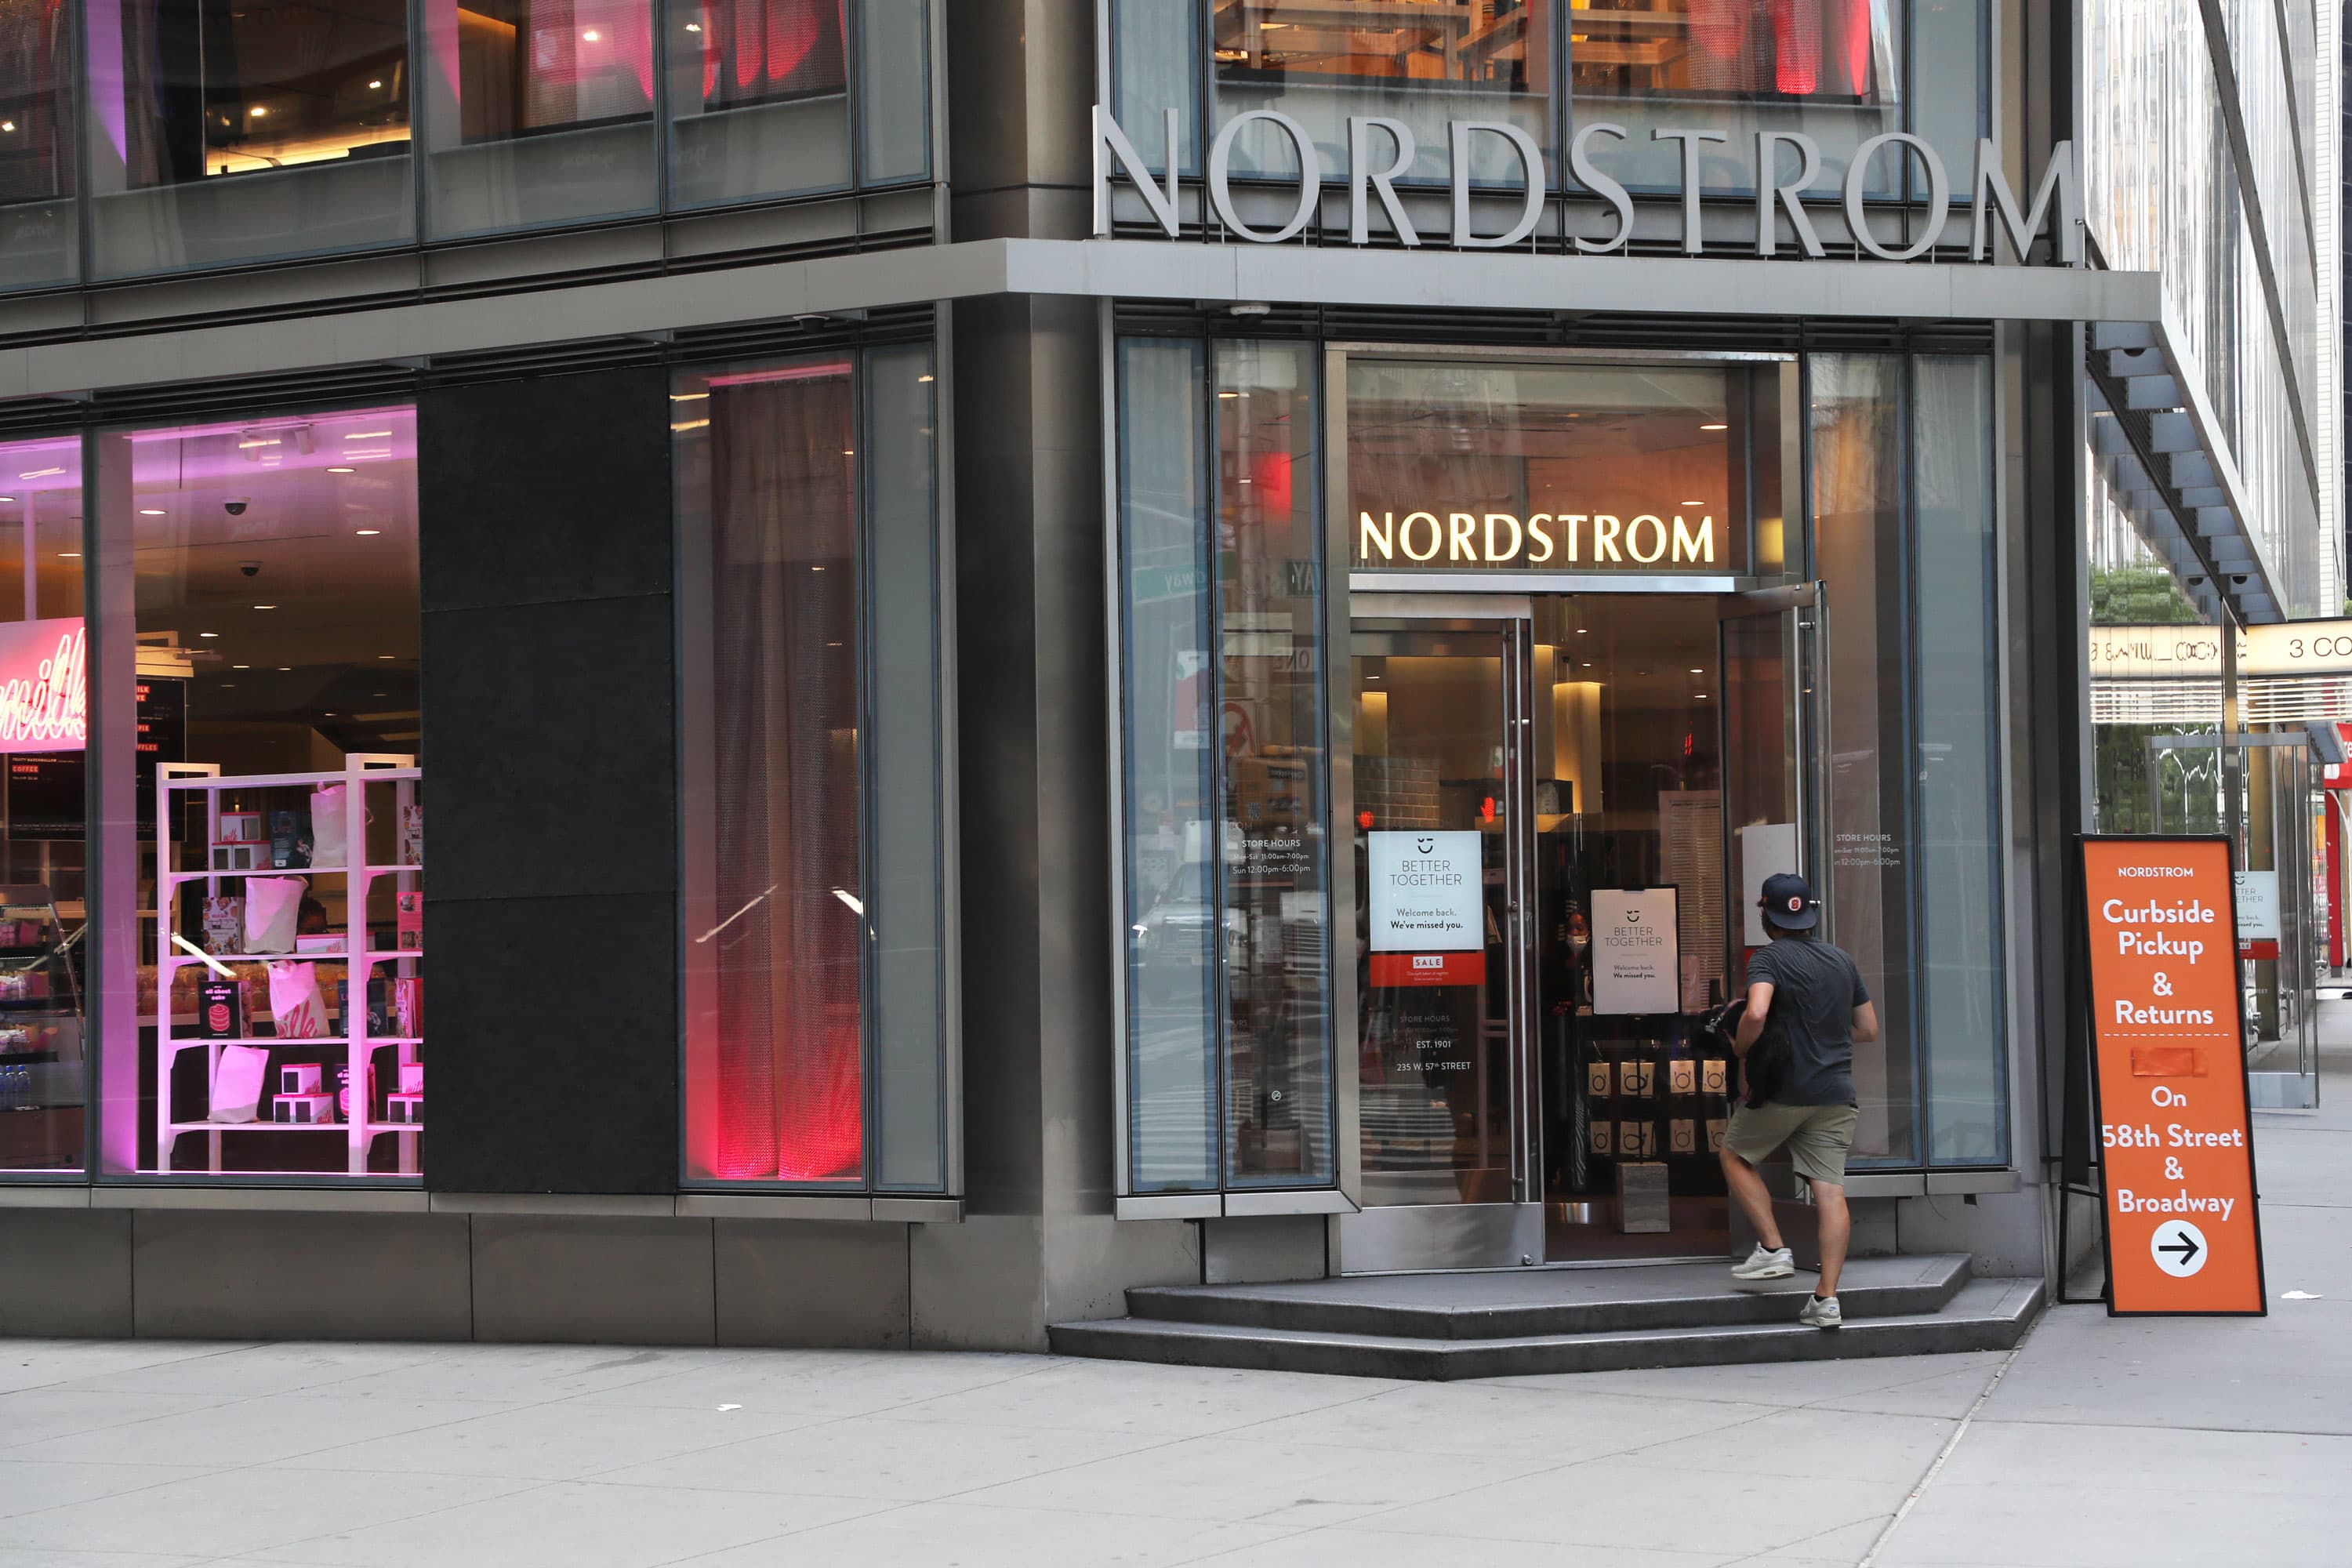 Nordstrom (JWN)’s shares fall as retailers say holiday sales tumble 22%